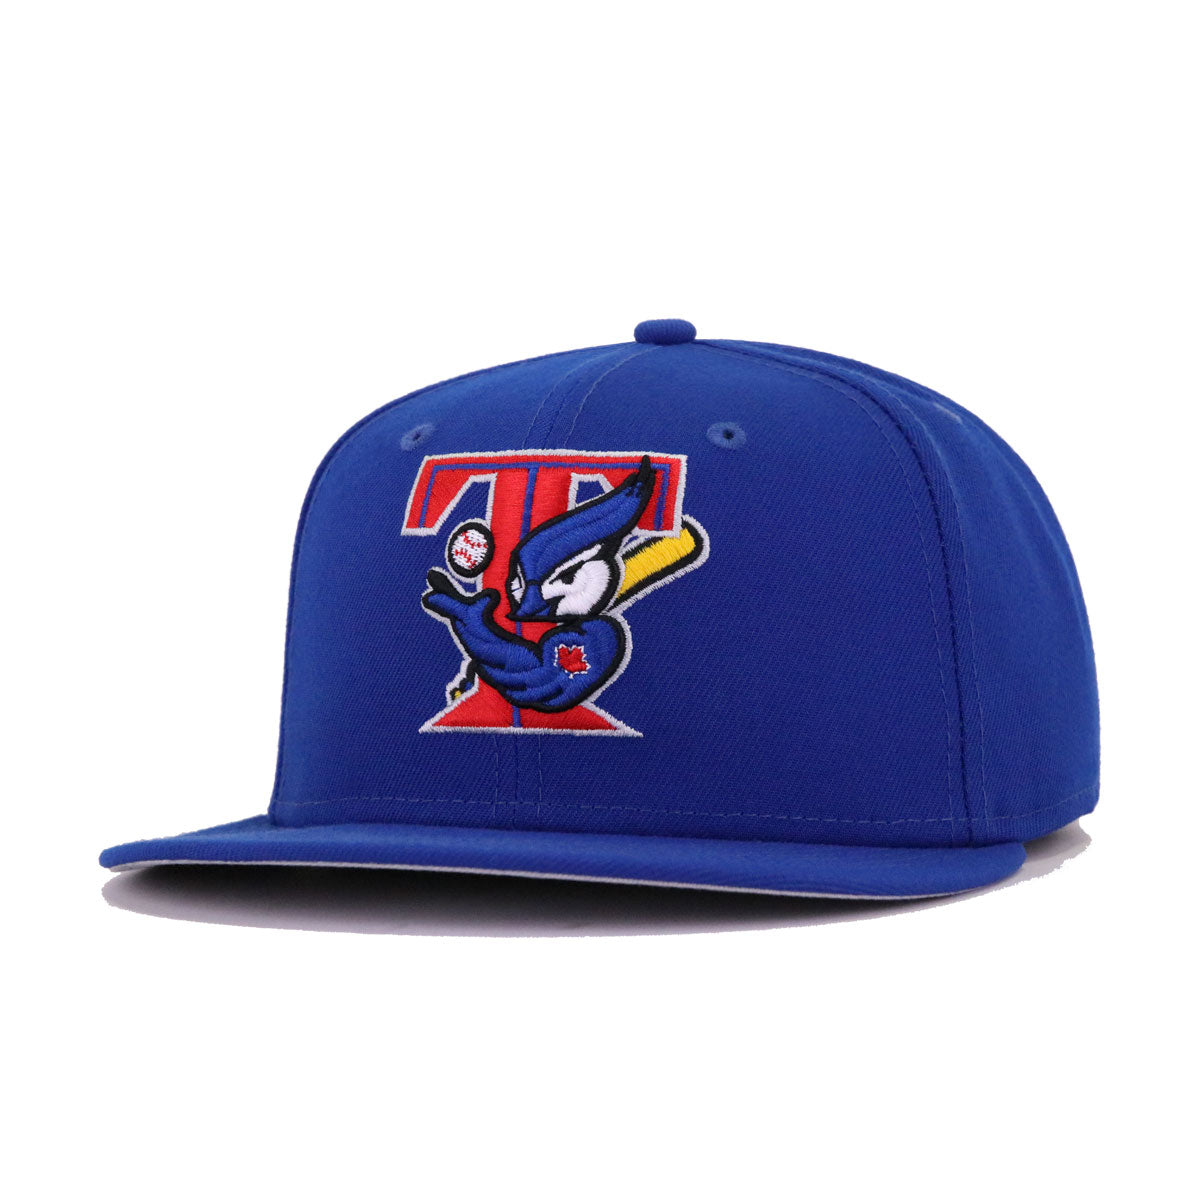 Toronto Baseball Hat Light Royal Blue 2001 Cooperstown AC New Era 59FIFTY Fitted